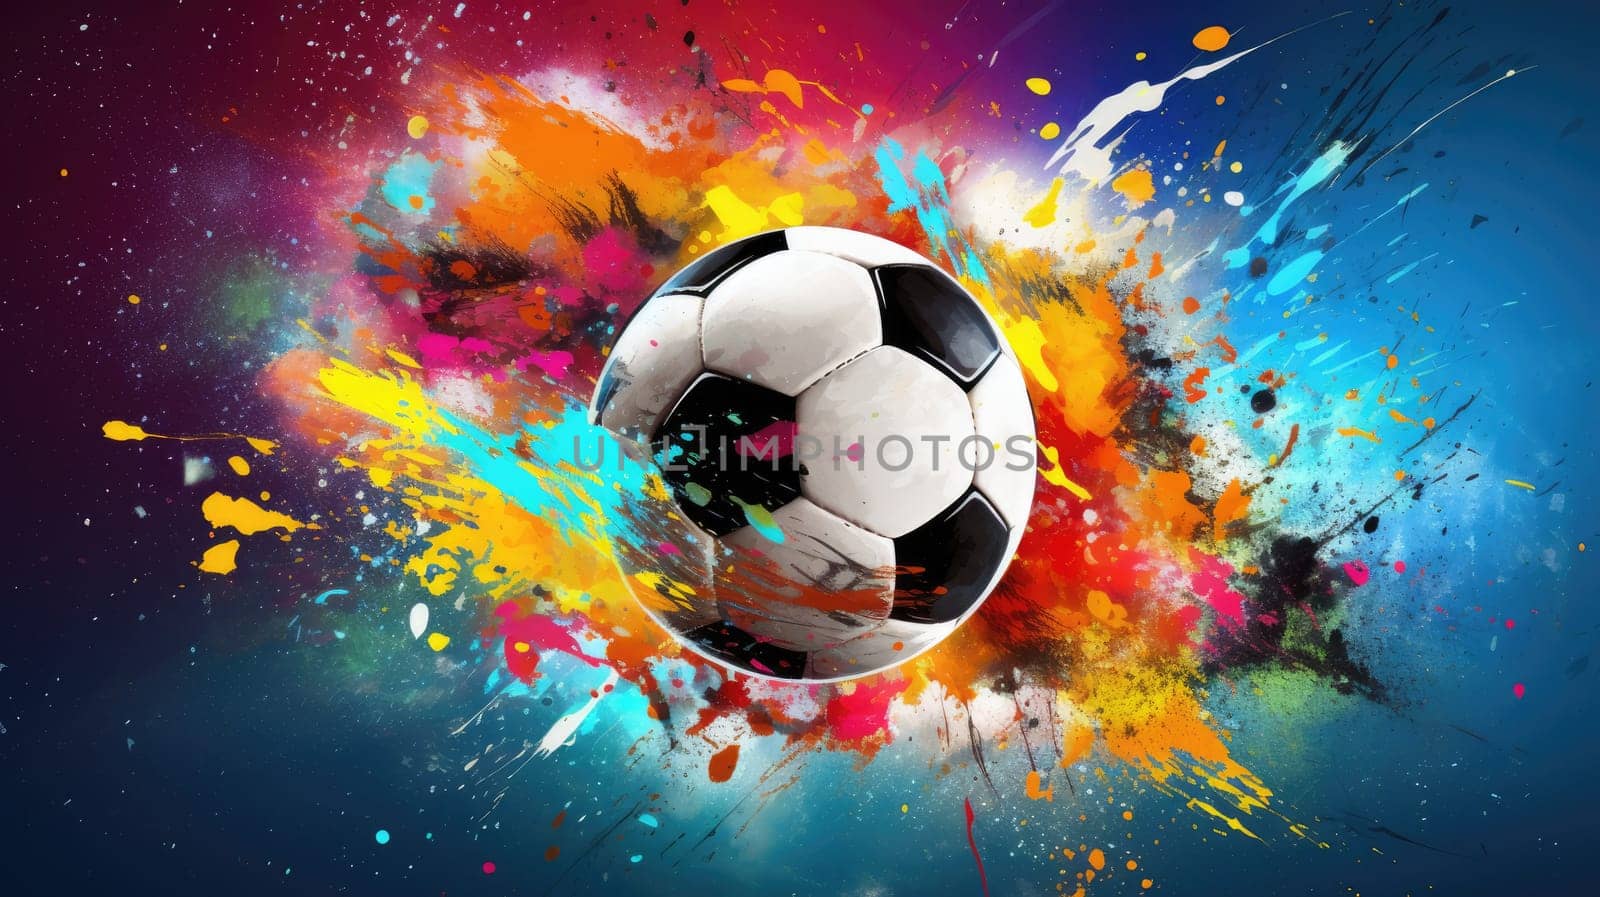 Soccer ball on vibrant splash colors background by natali_brill